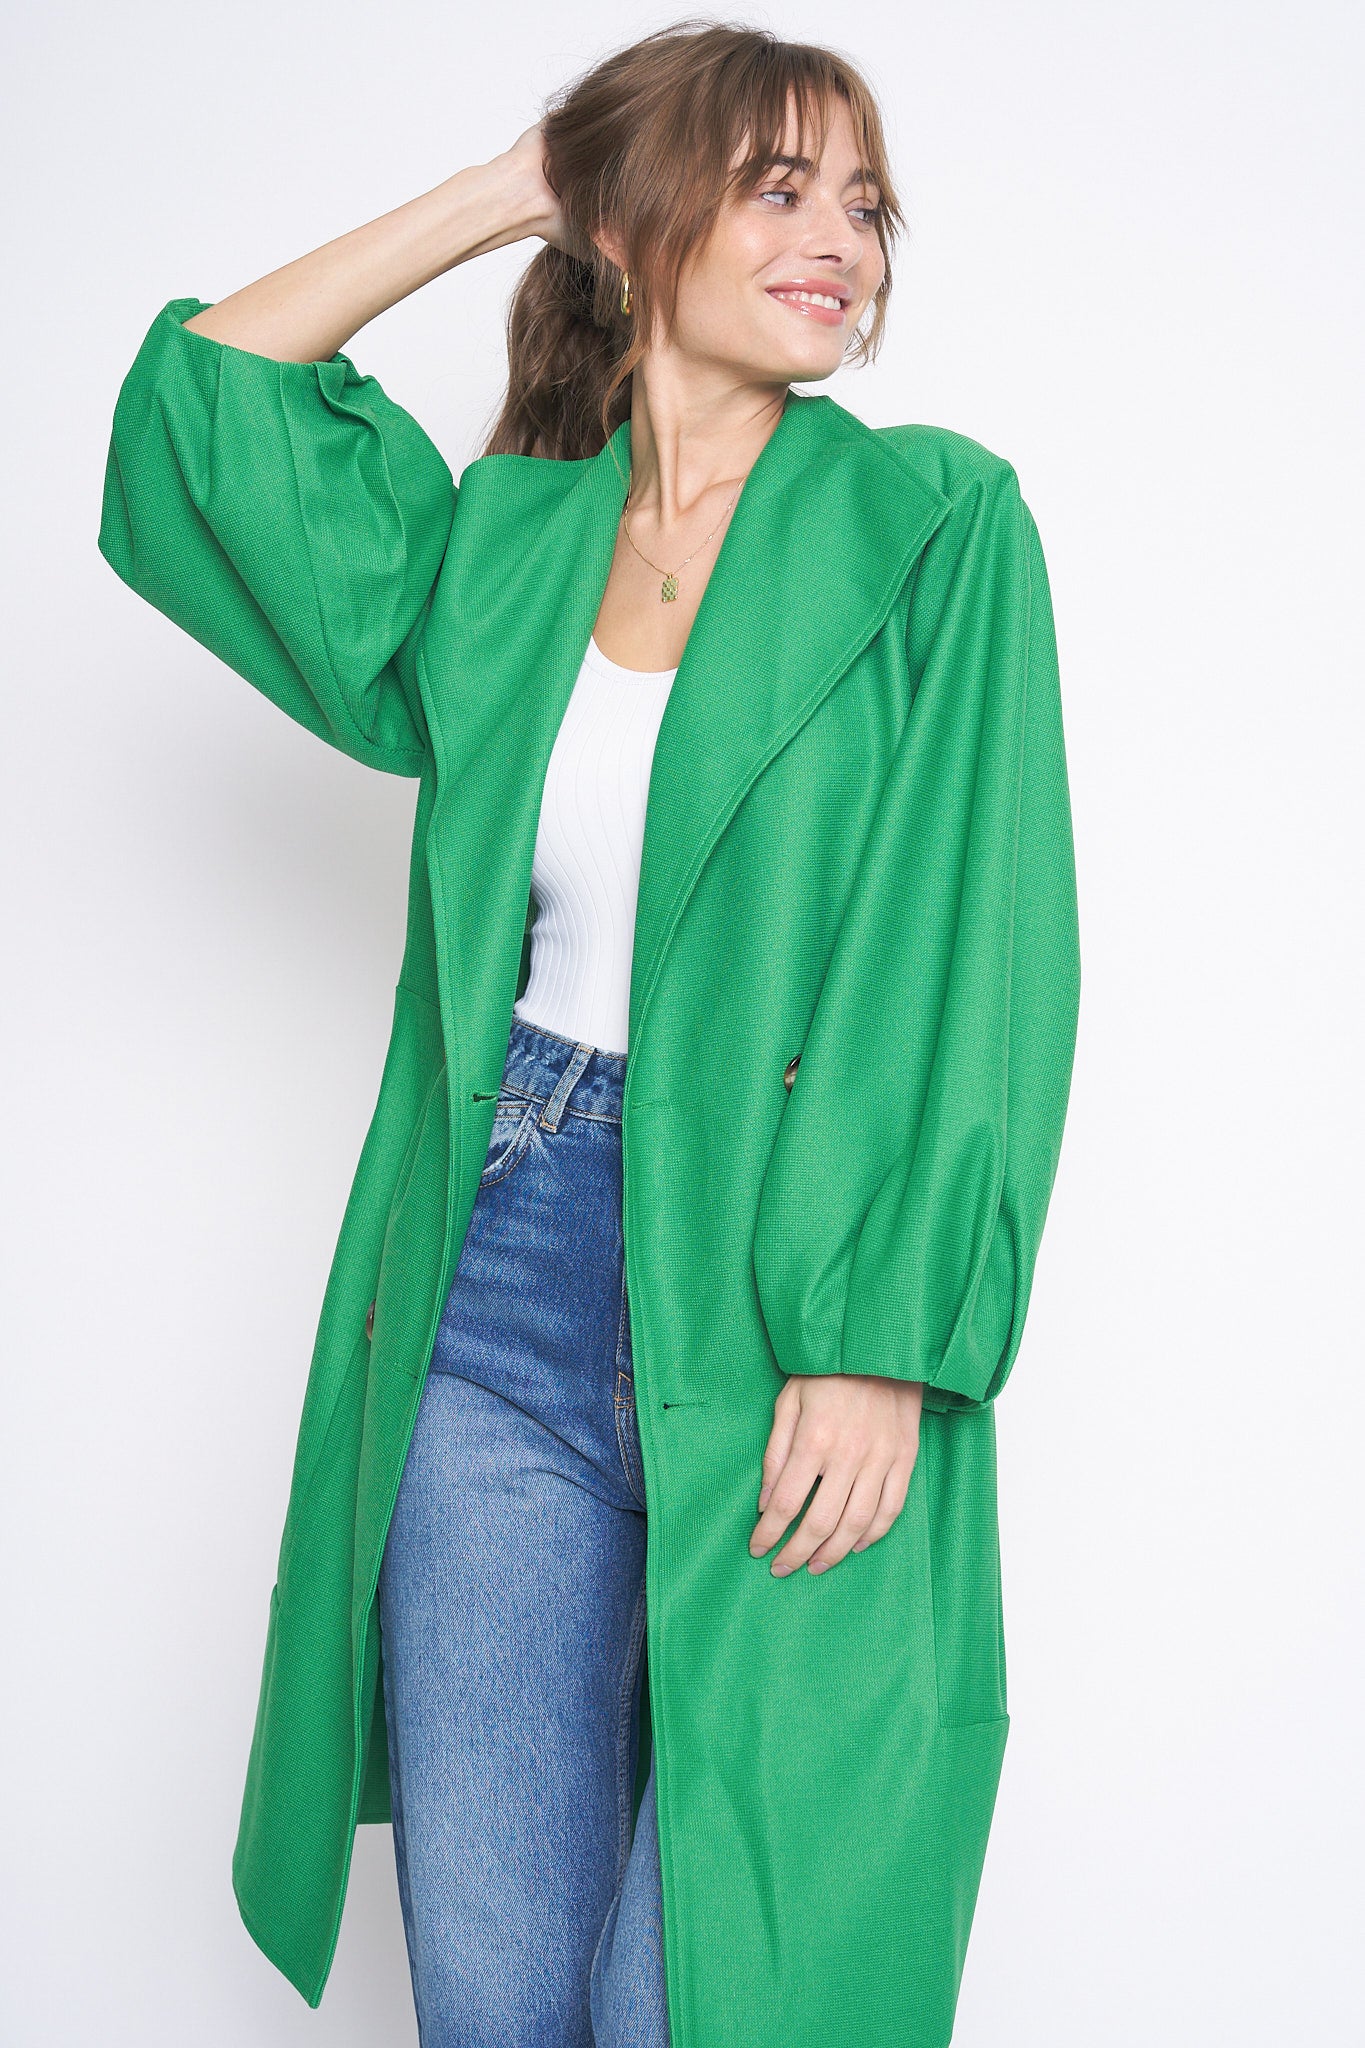 Pleated Long Sleeve Poppy Bright Green Color Long Knit Jacket Double Breasted Puff Sleeves Workwear Officewear Stylish Womens Fashion Style Outerwear Long Jacket Oversized Vintage Inspired Design 